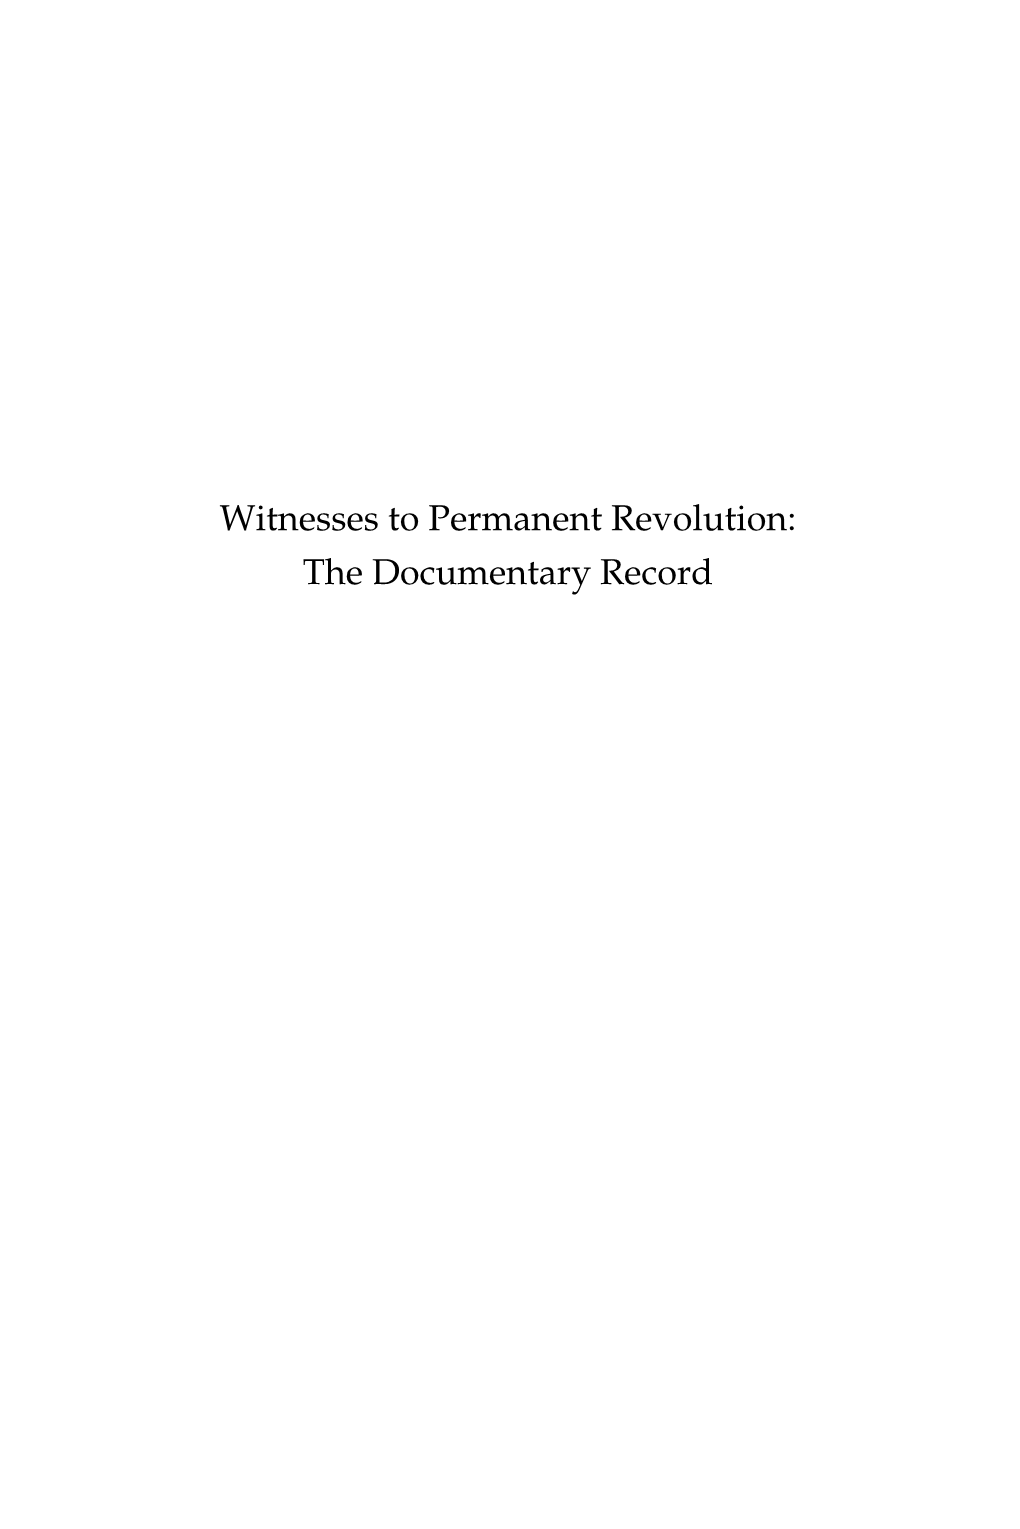 Witnesses to Permanent Revolution: the Documentary Record Historical Materialism Book Series